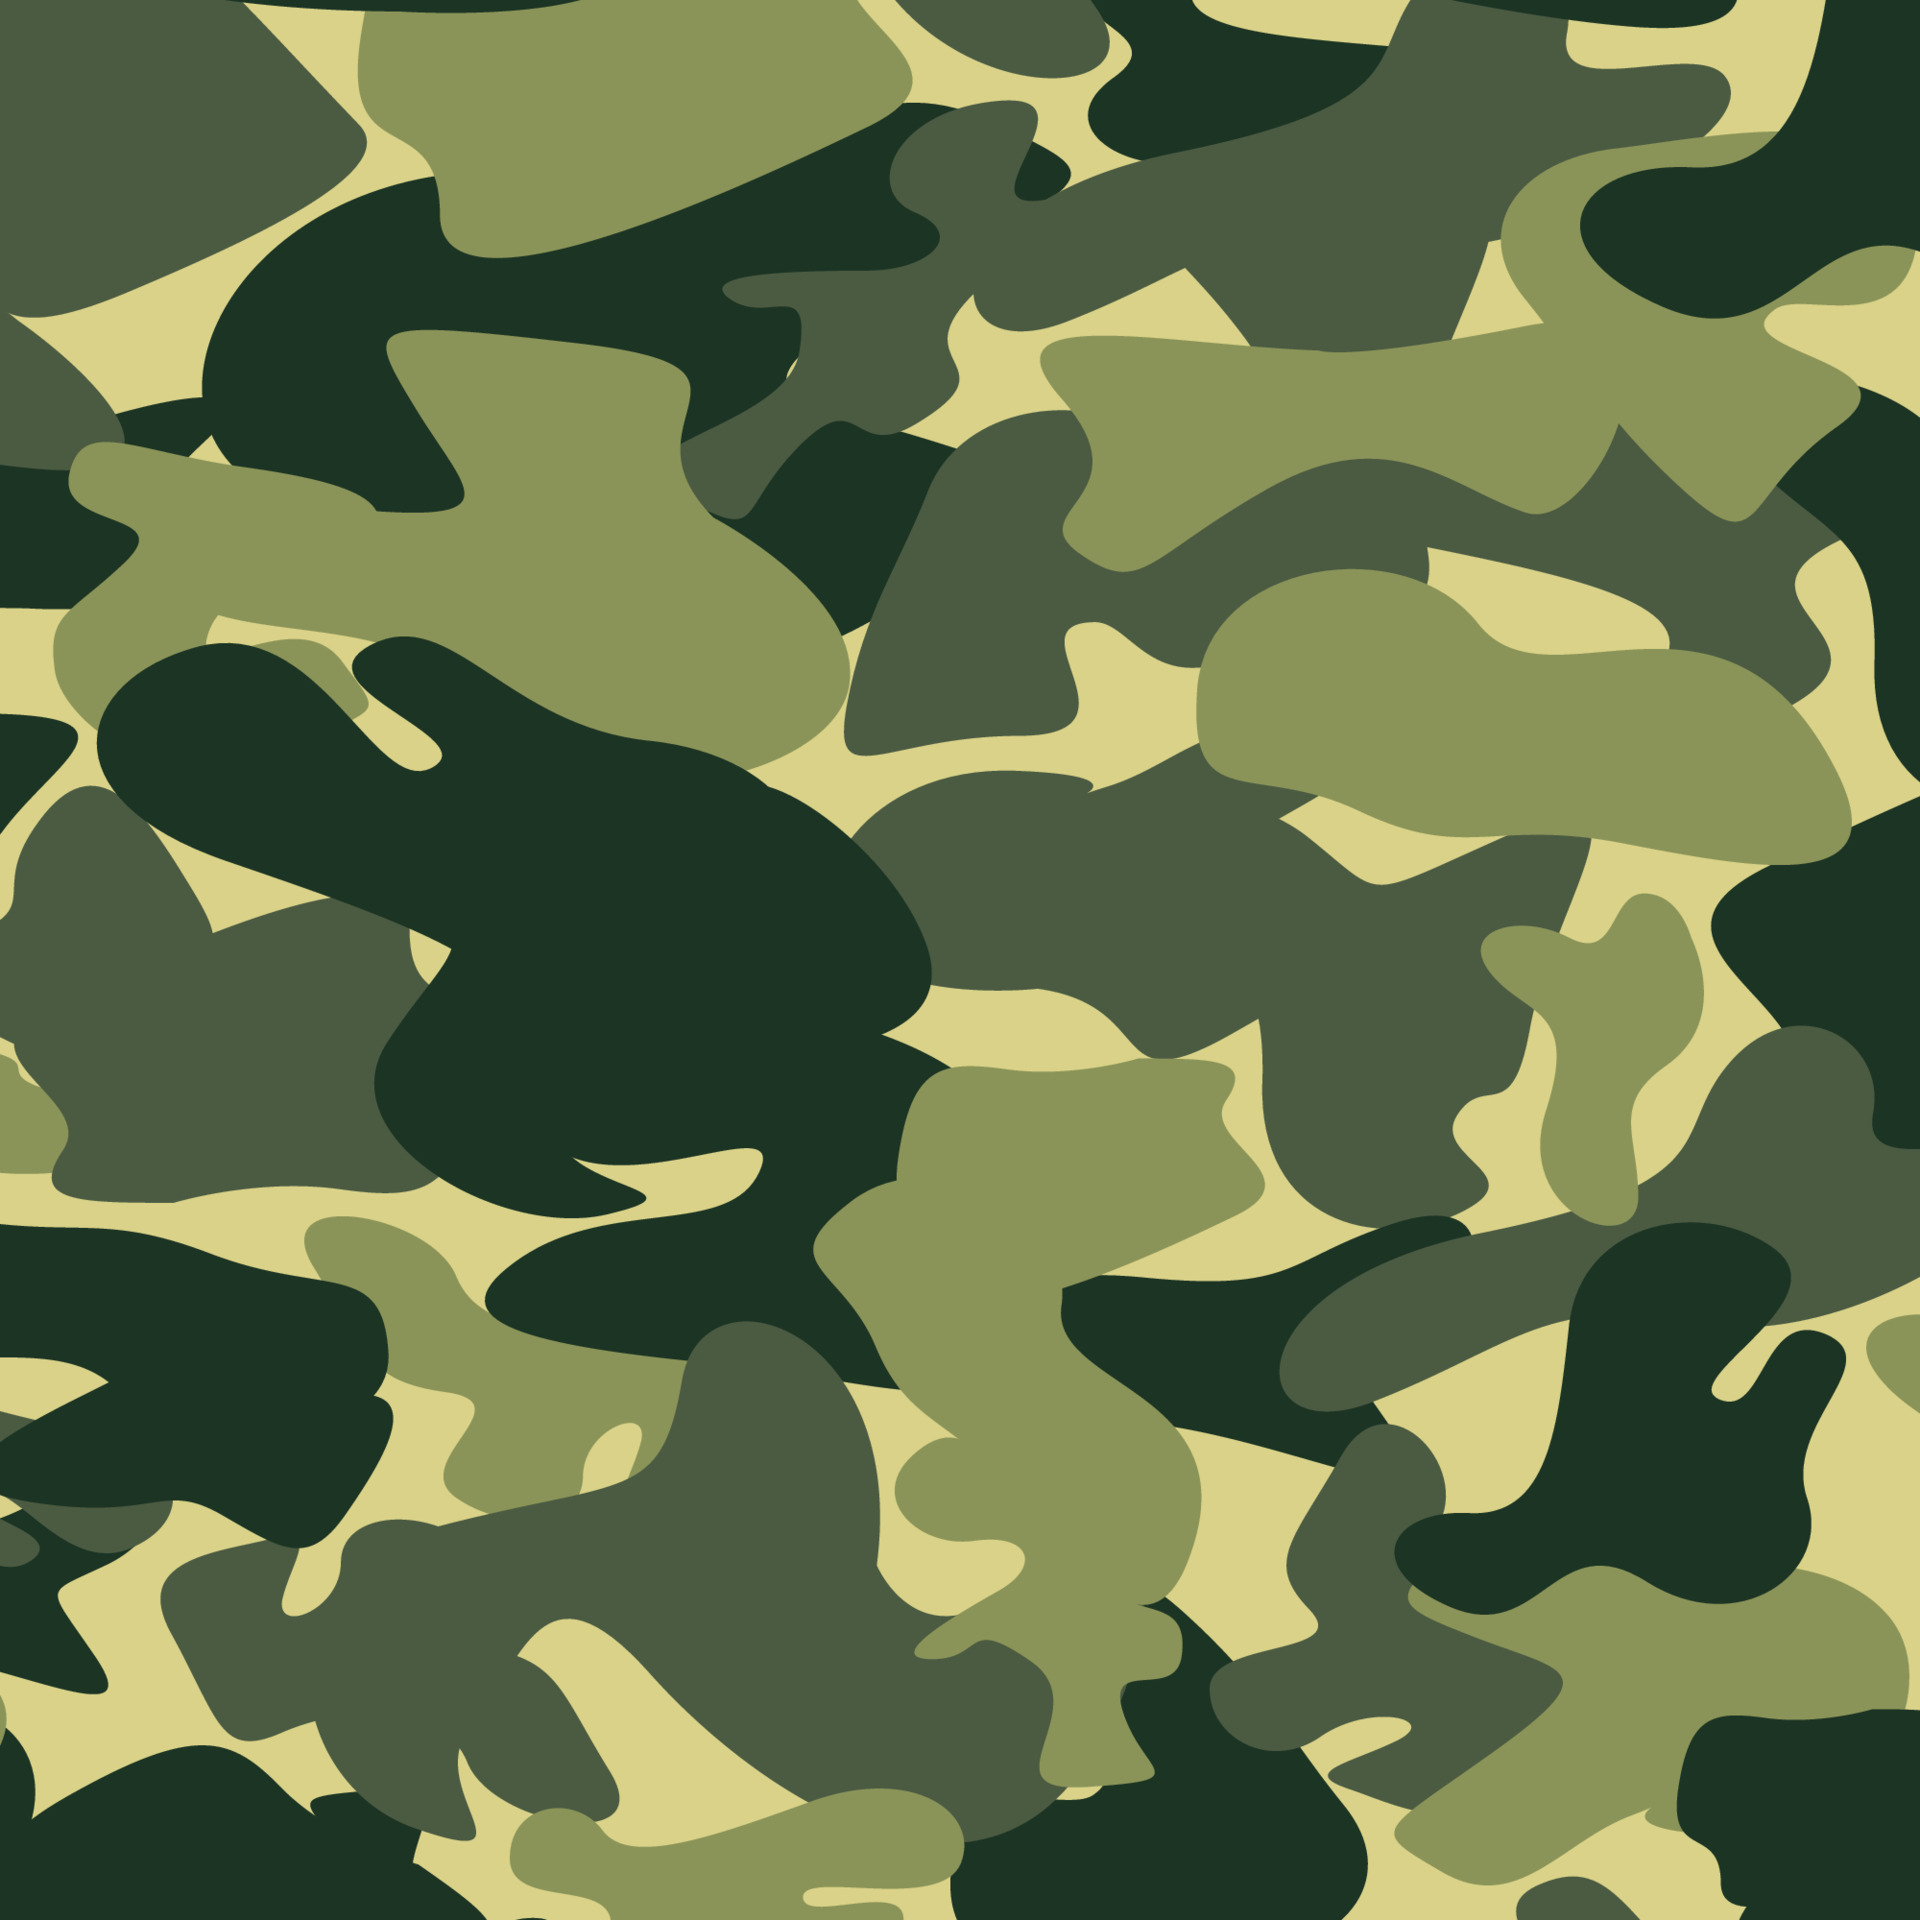 army camouflage wallpaper